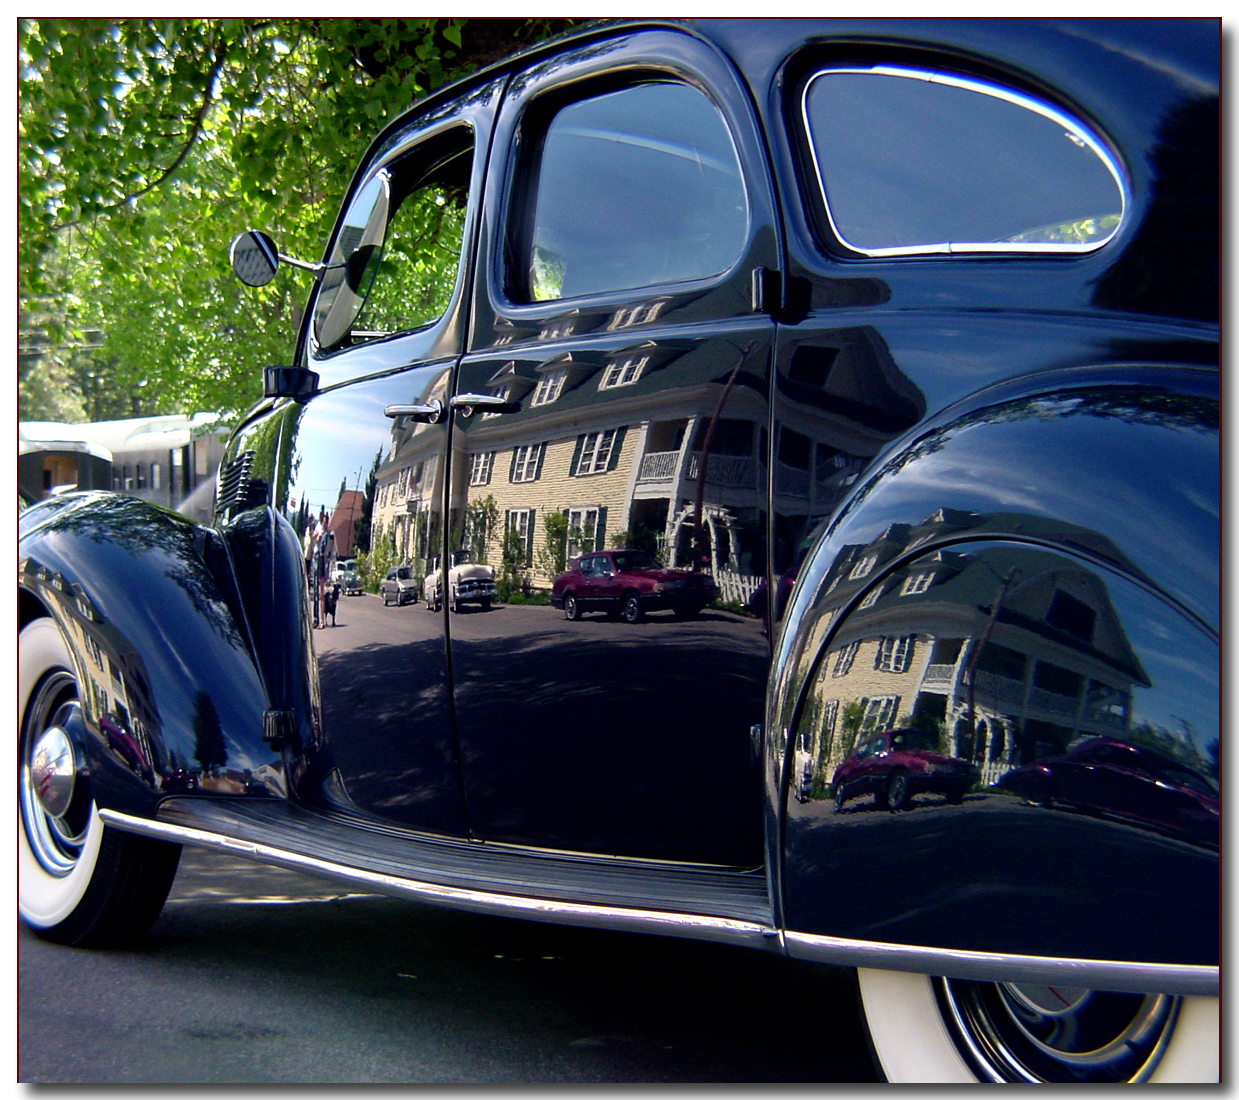 1941 Lincoln Zephyr by CindyD